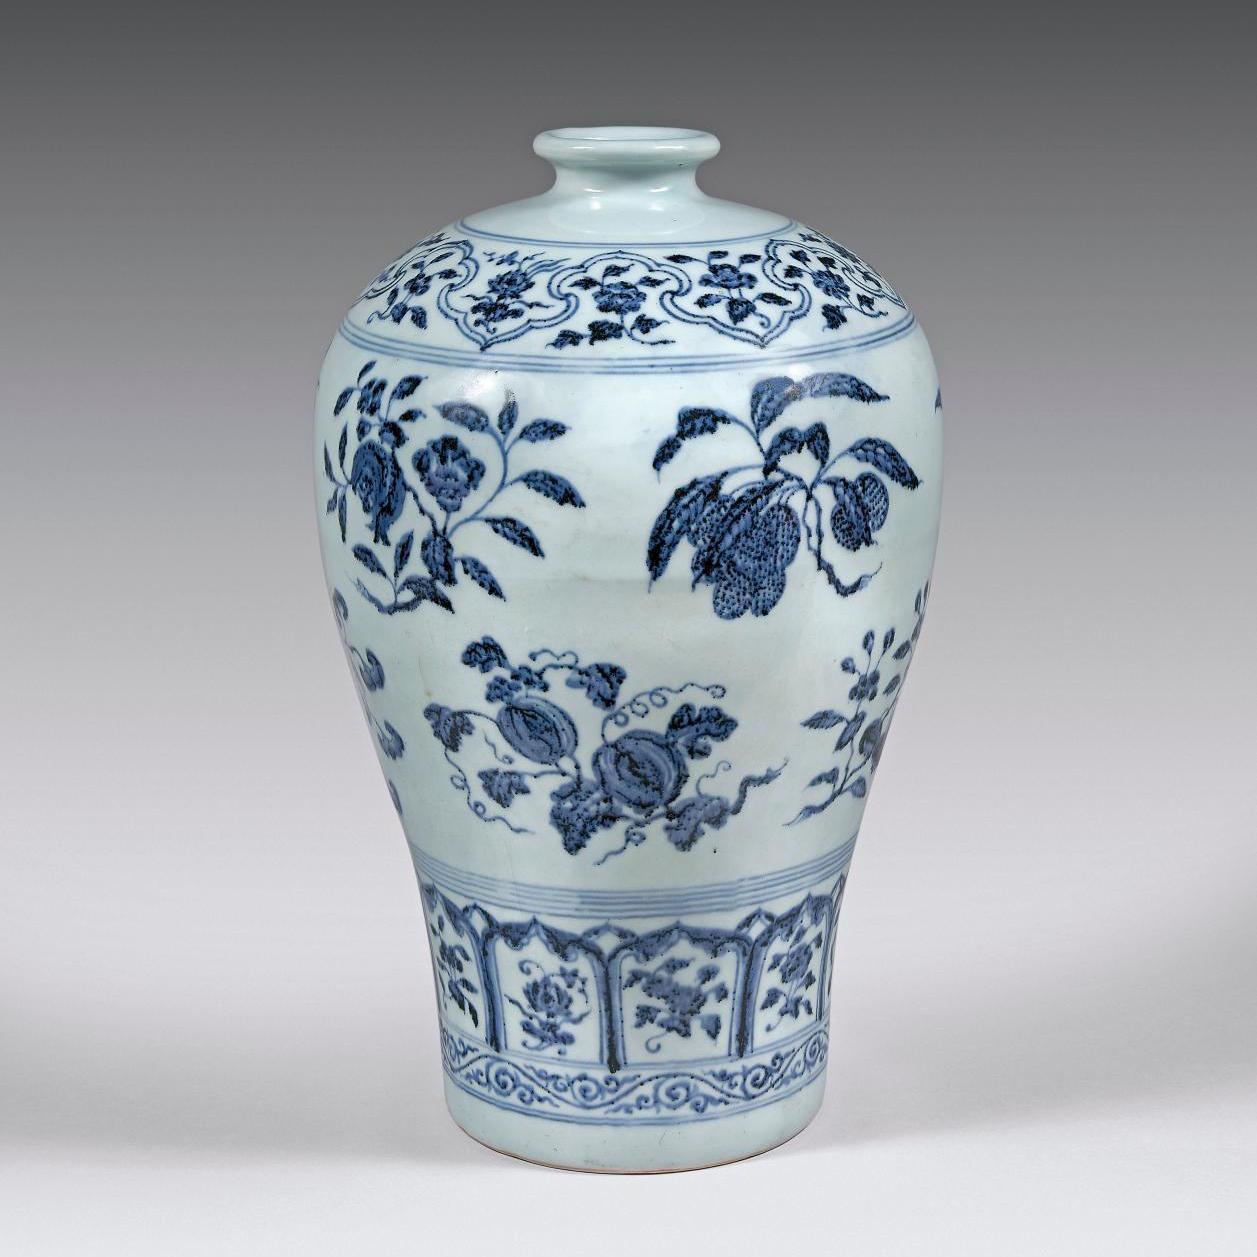 An Imperial Bid for a Ming Vase - Lots sold